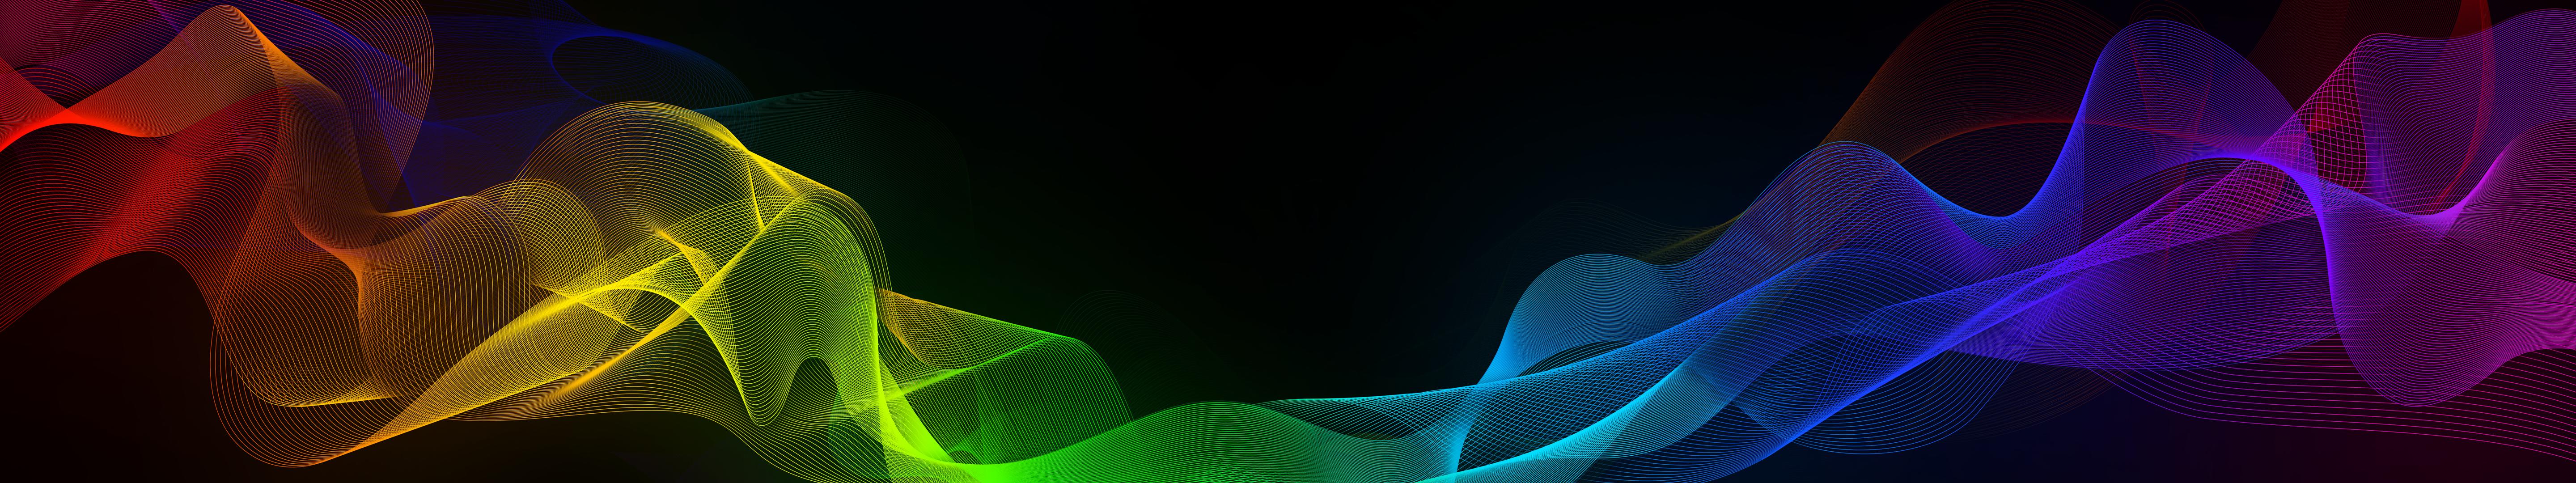 Razer Project Valerie Wallpaper without logo (5760x1080)